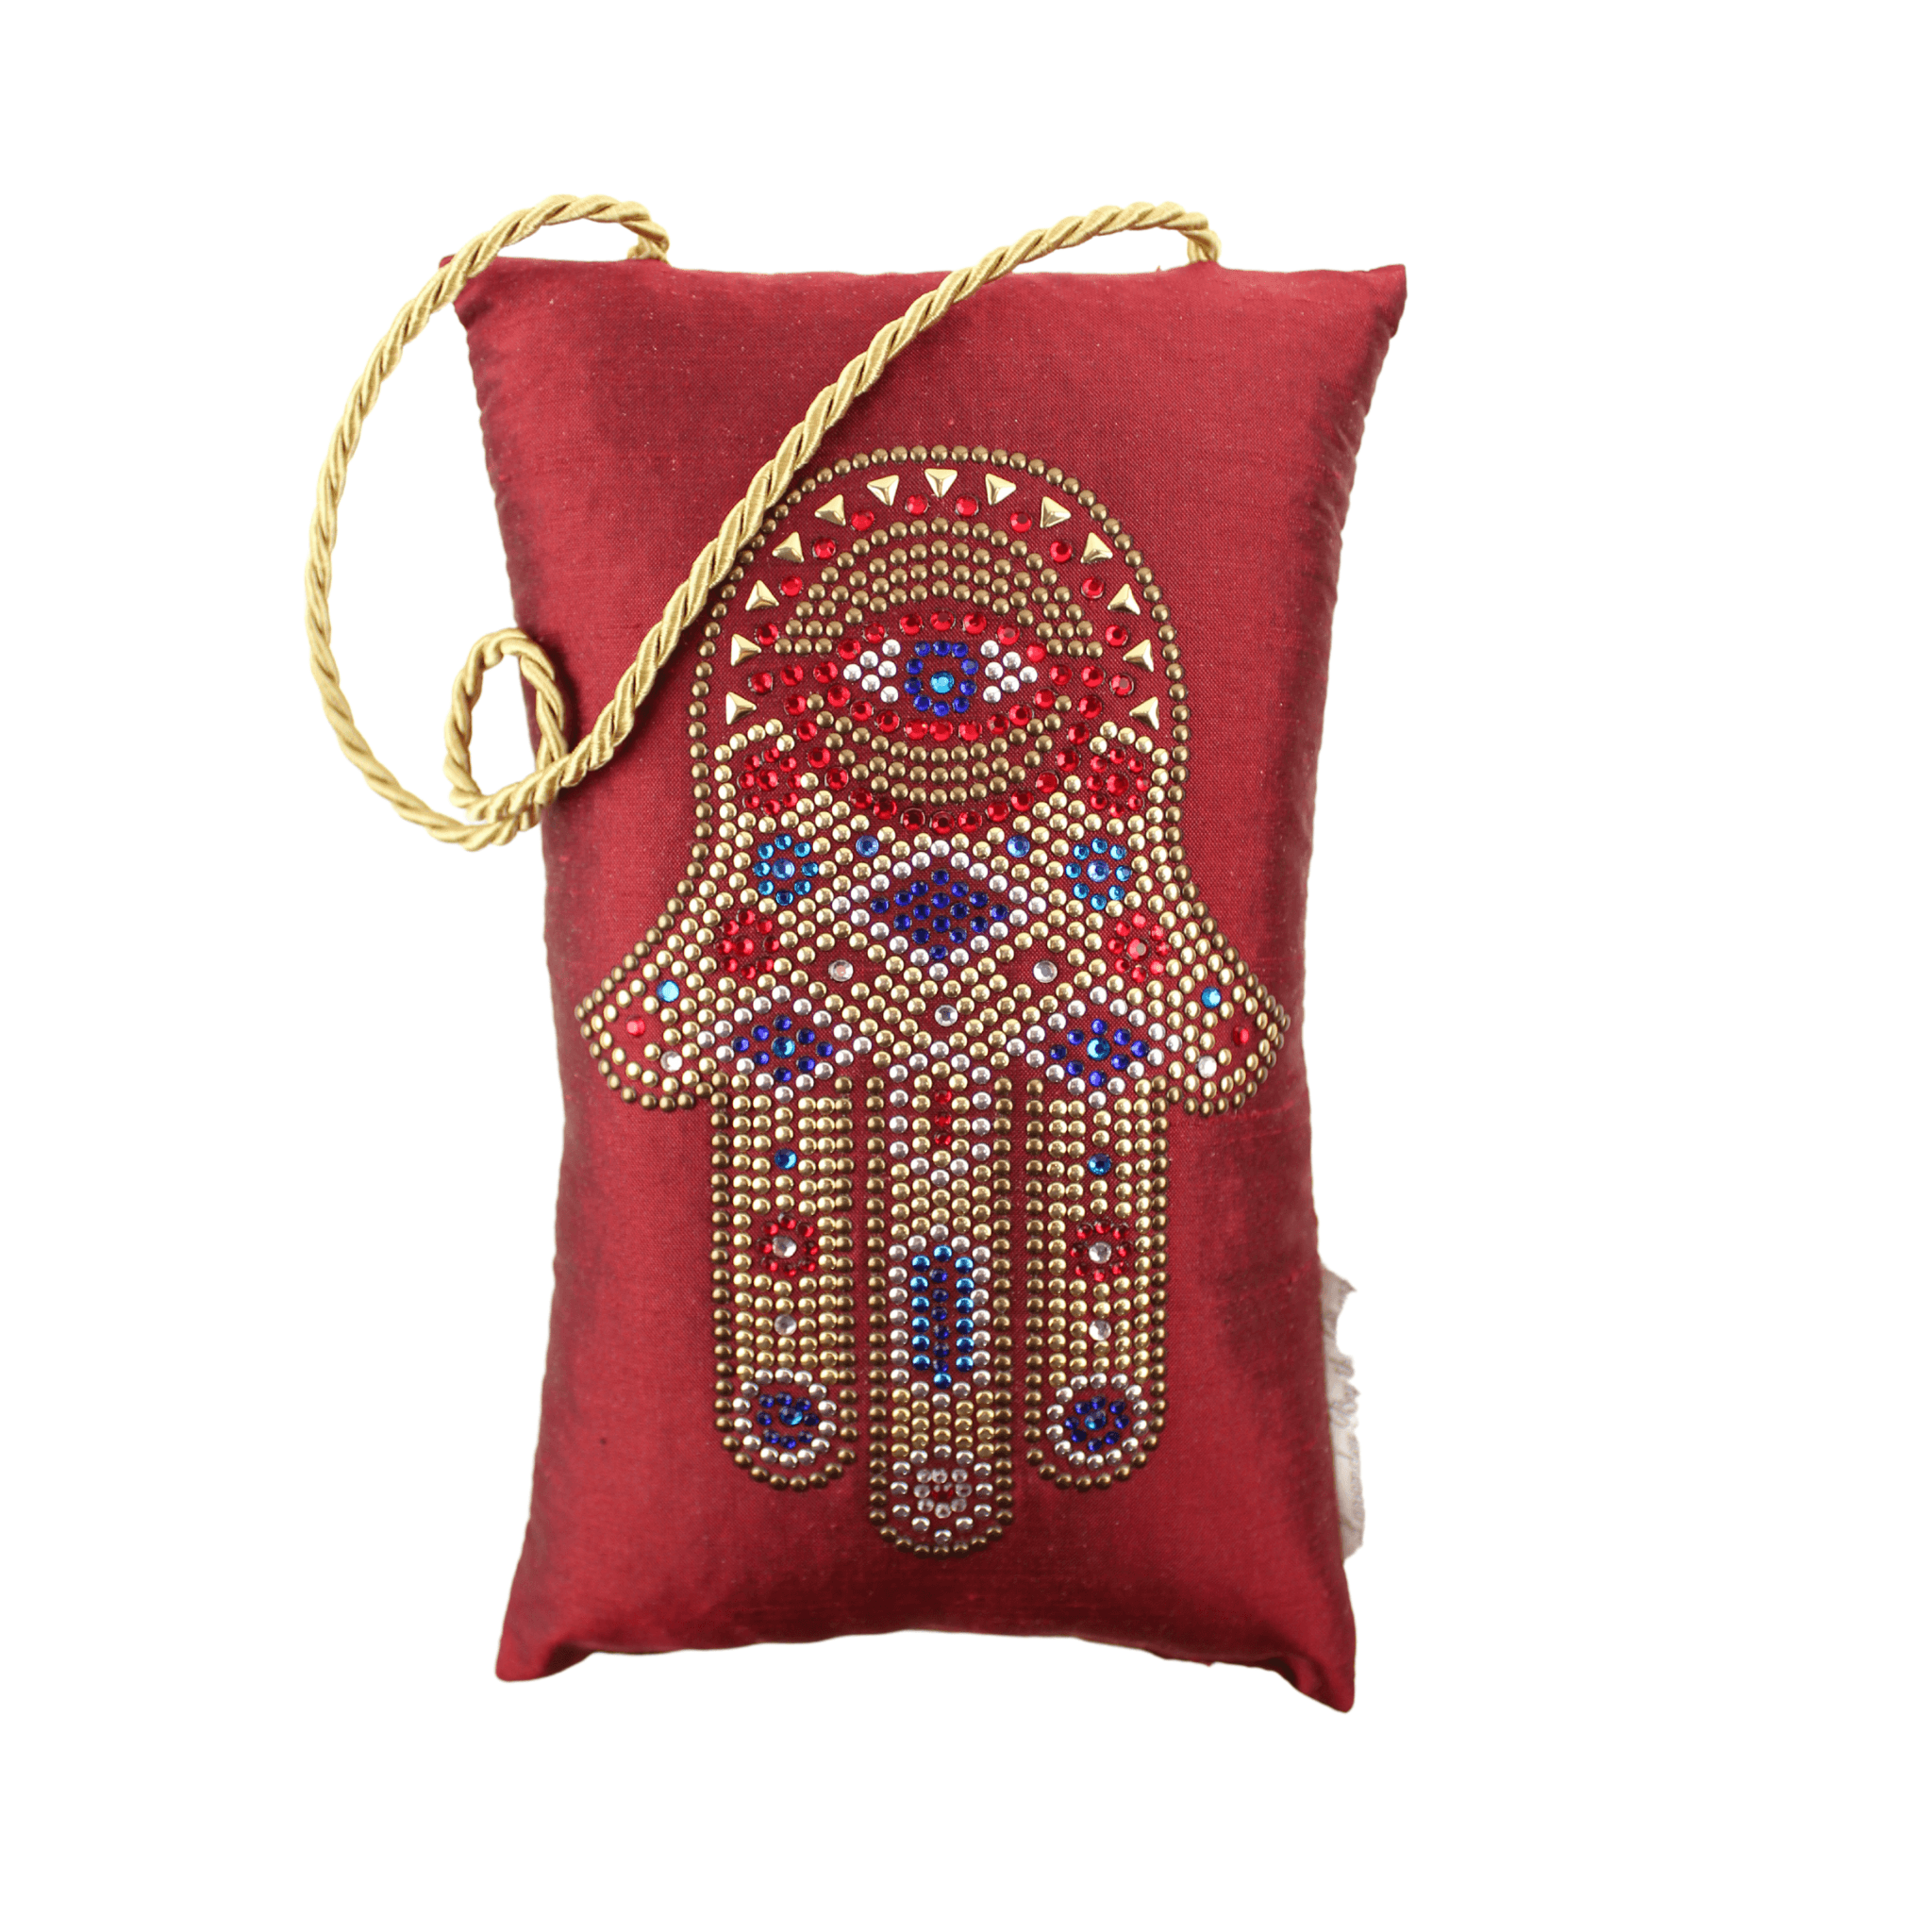 Hamsa Pillow - Lavender By The Bay